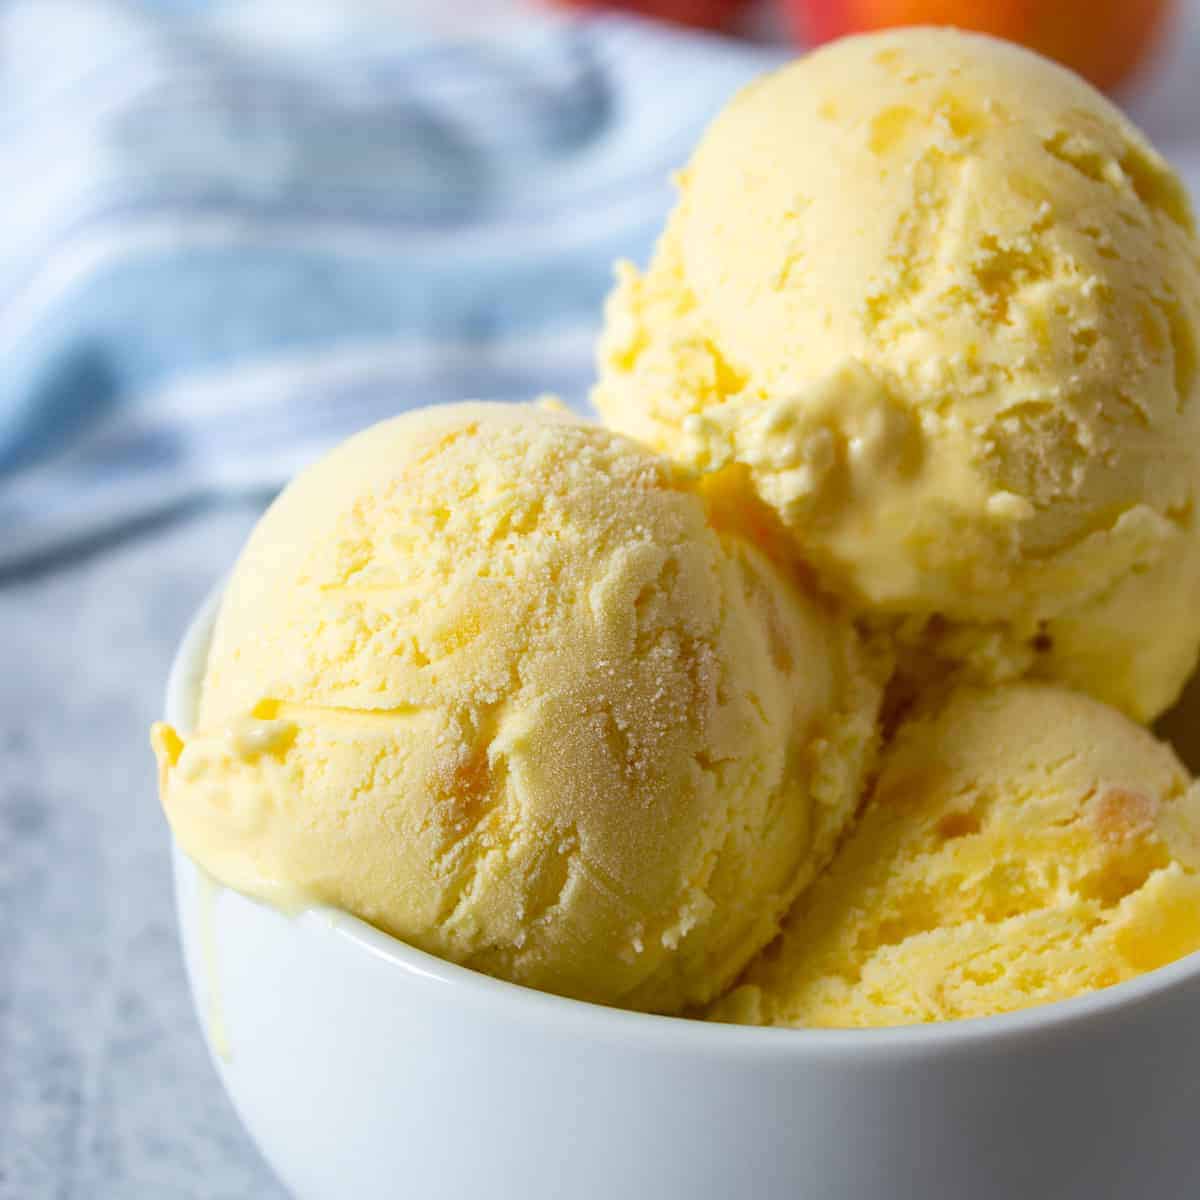 Scoops of peach ice cream in a white bowl.